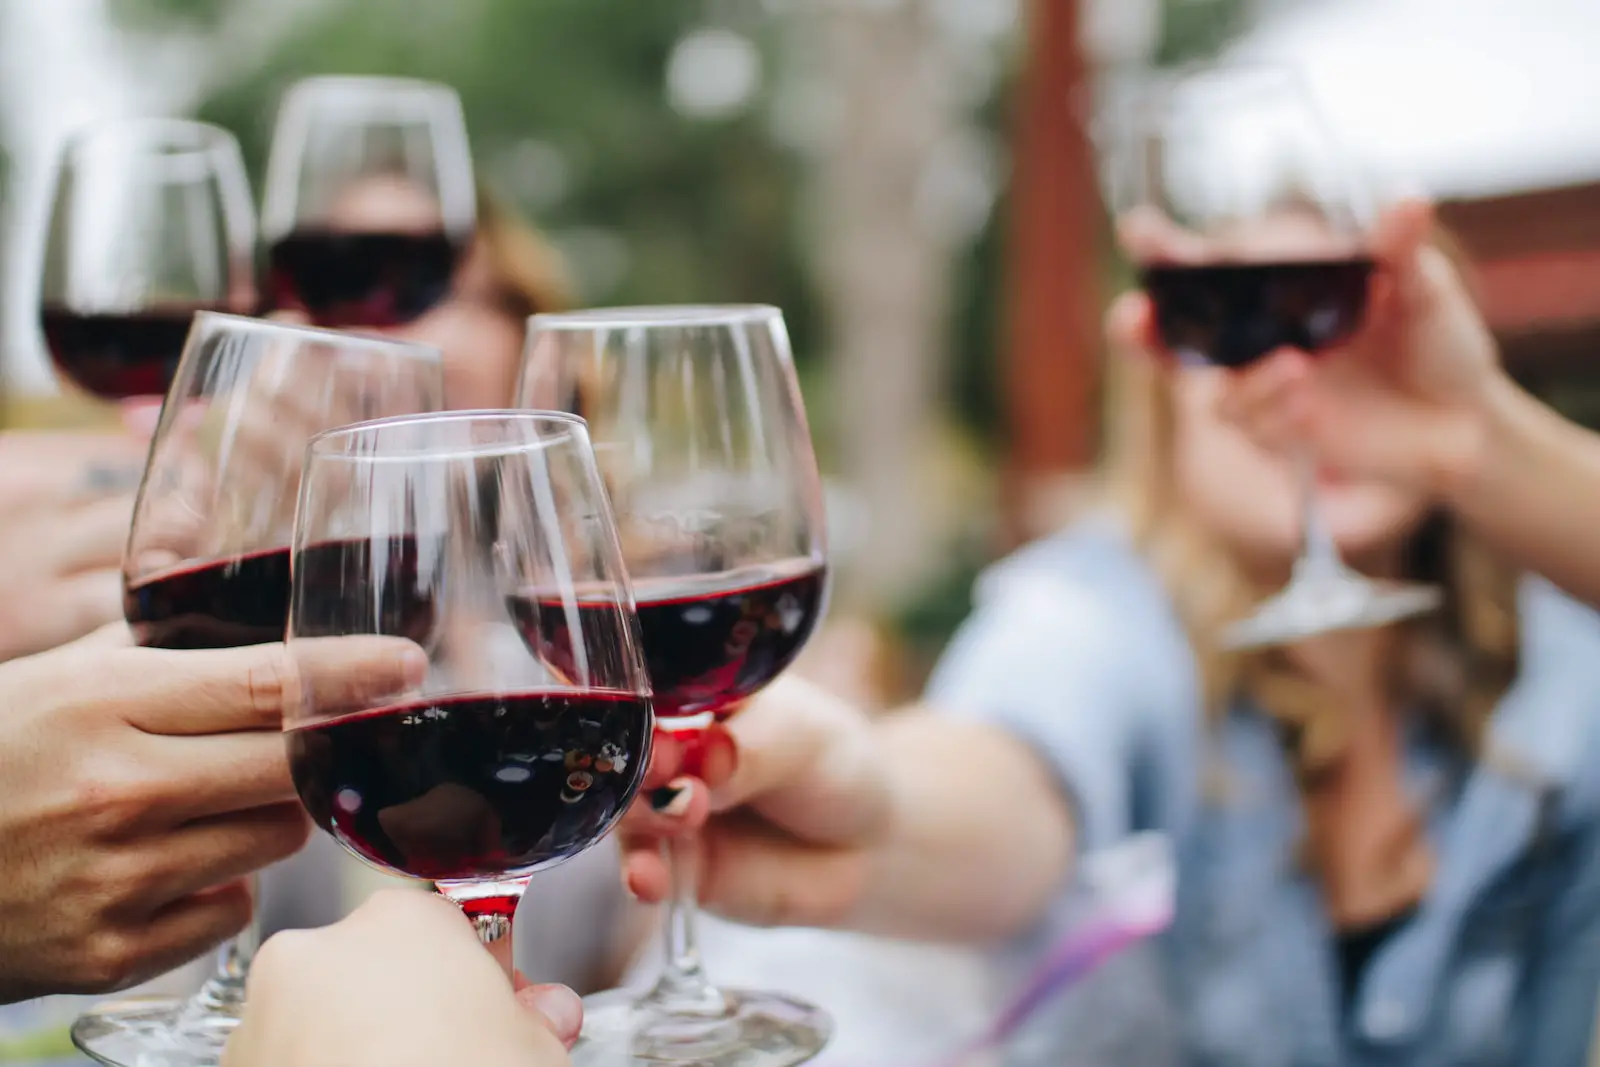 people tossing their clear wine glasses - how to start a wine tasting group